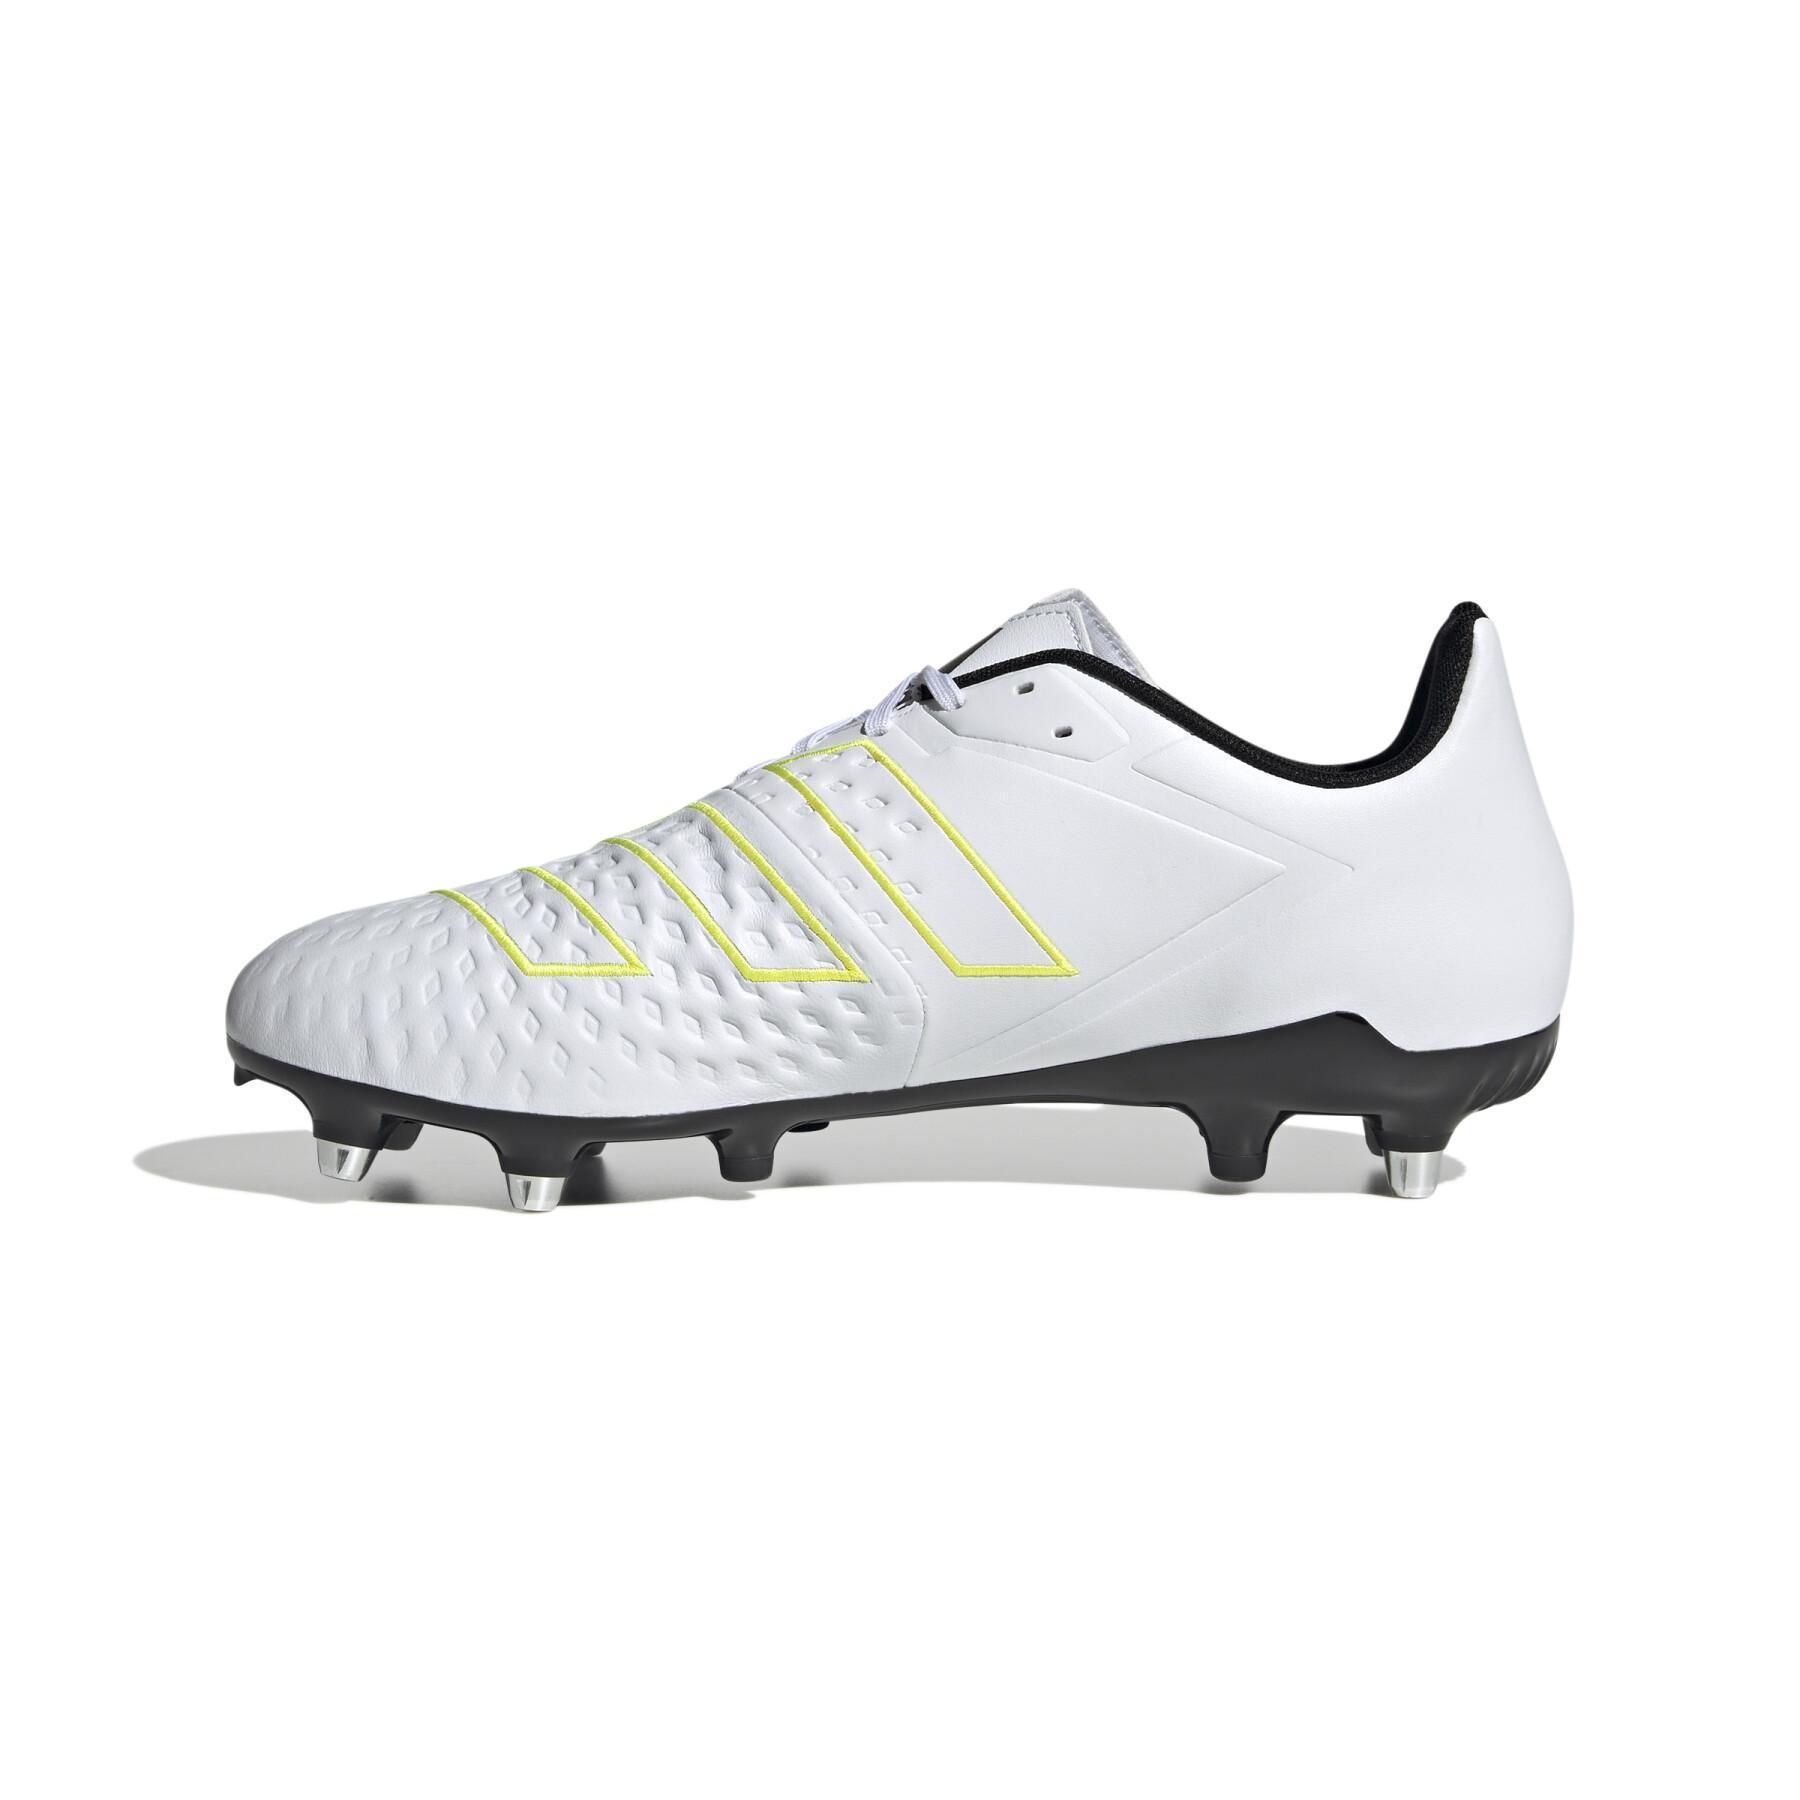 Chaussures de rugby adidas Malice Elite Sg